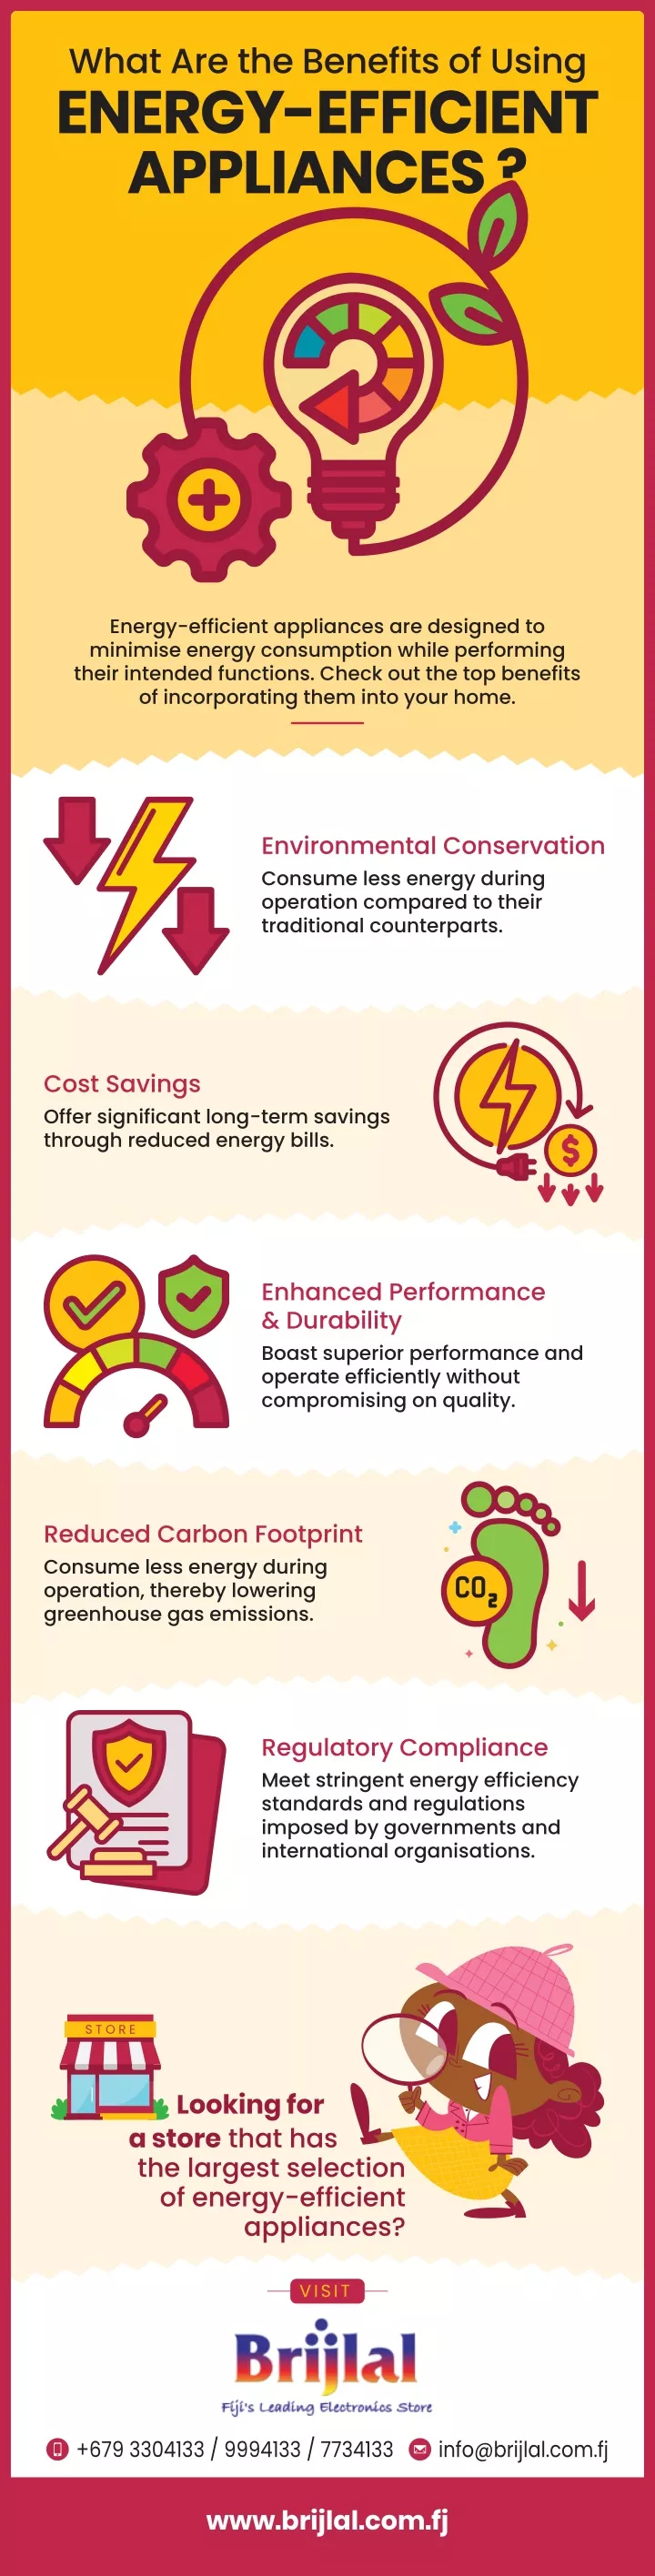 what are the benefits of using energy efficient